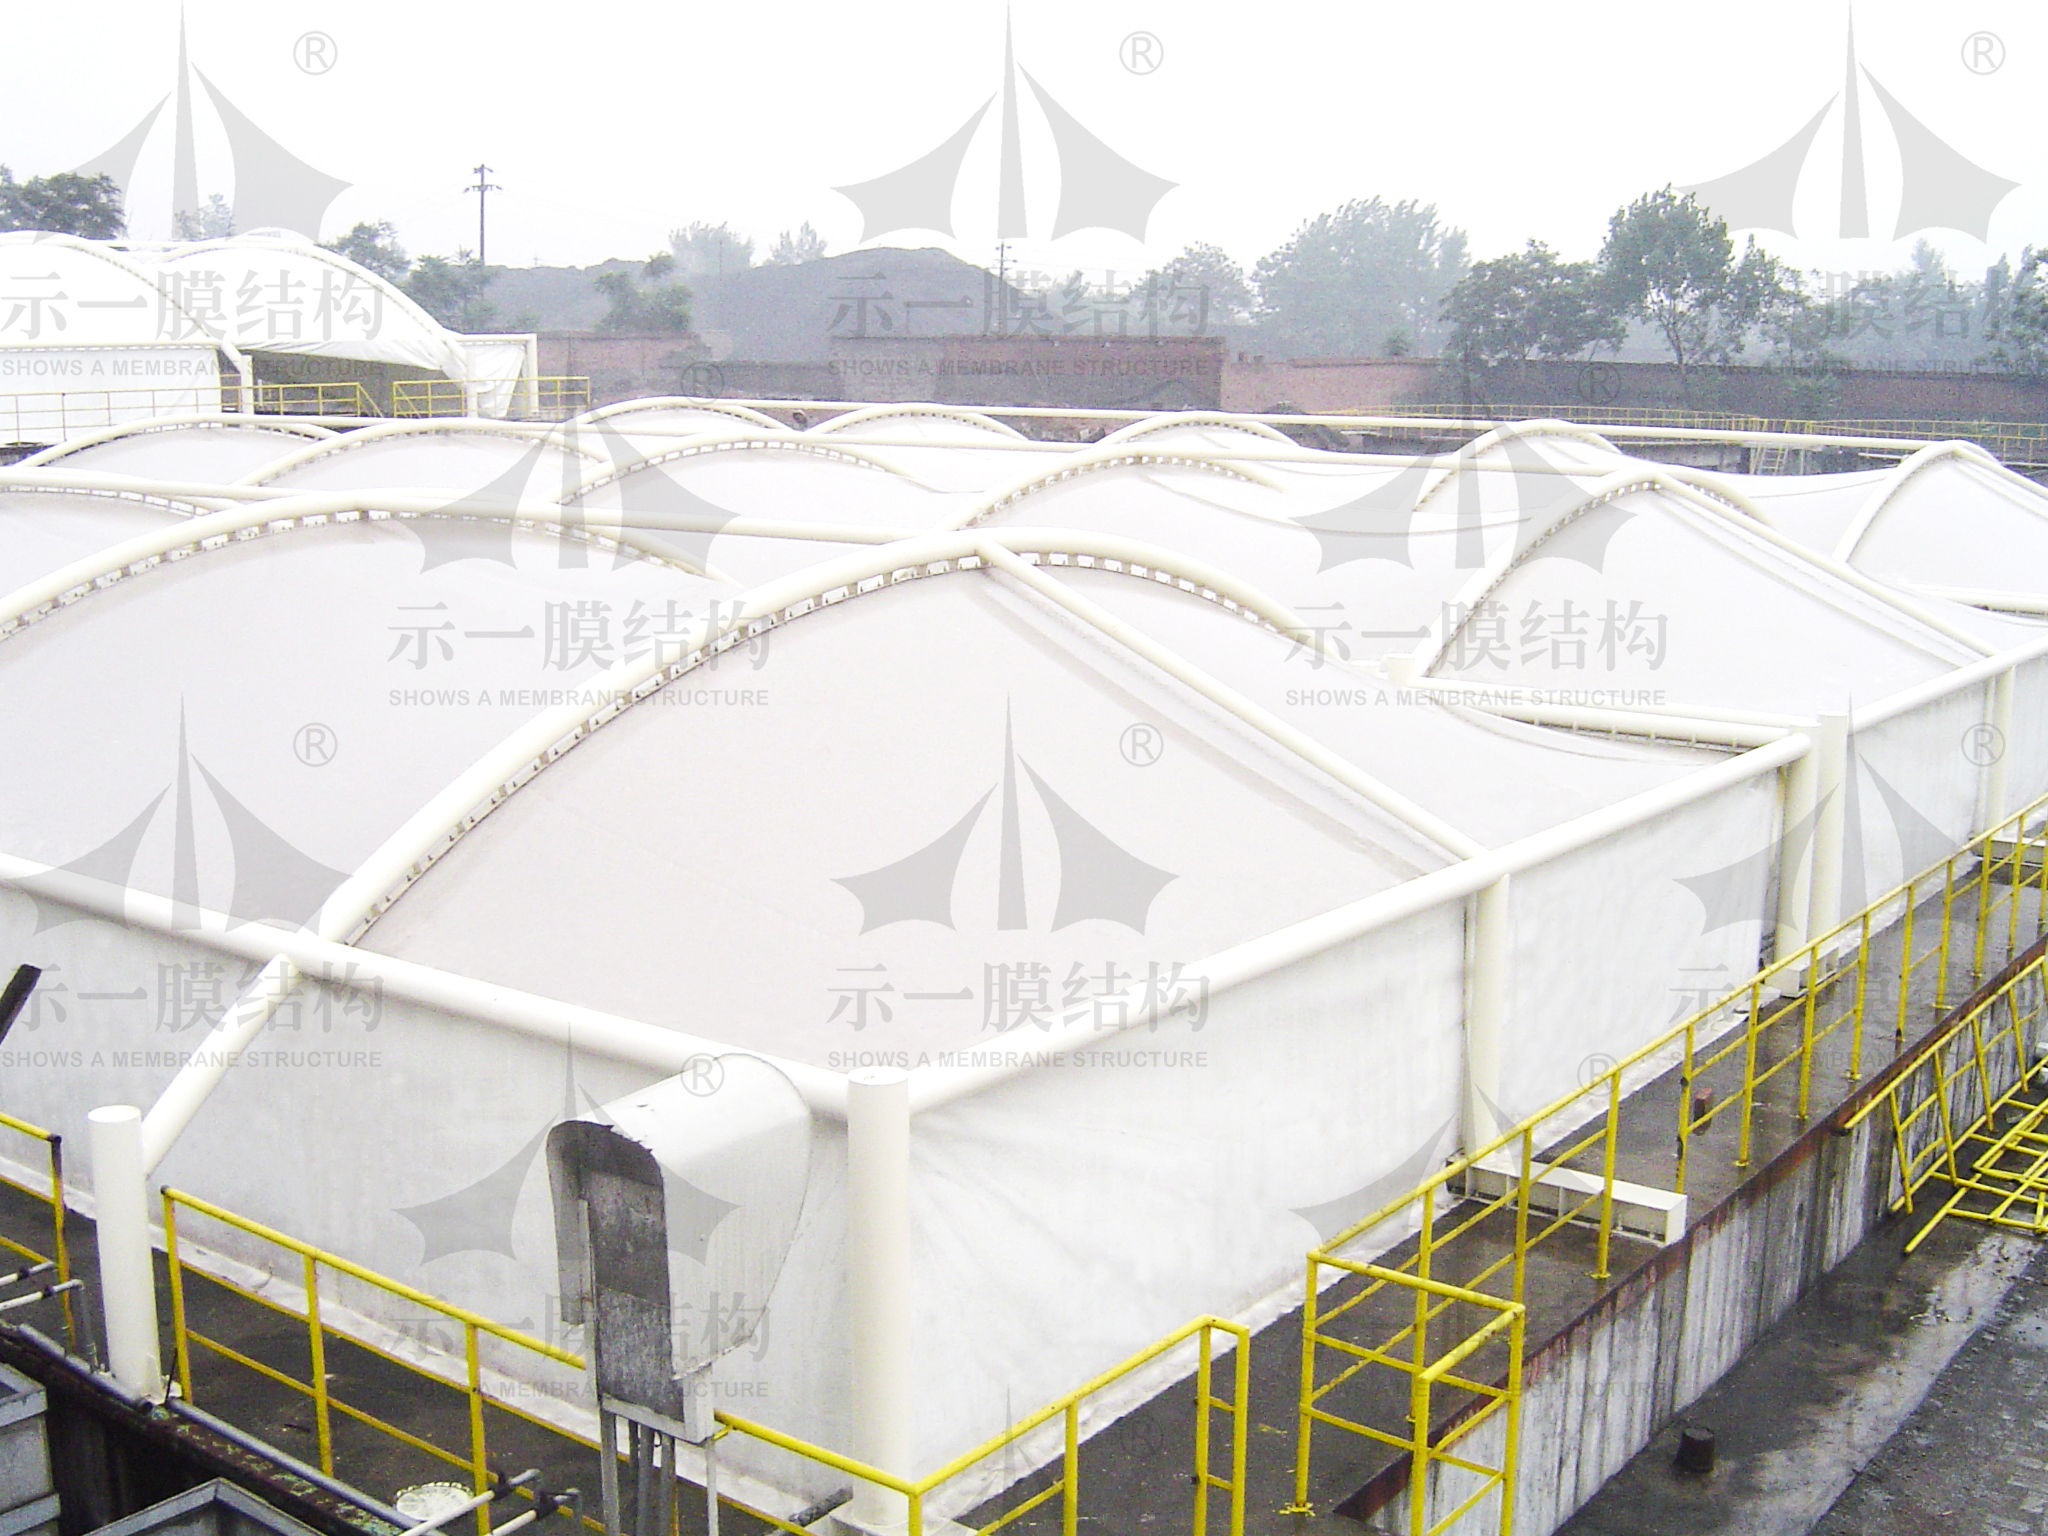 Do you know about the membrane structure sewage tank cover?